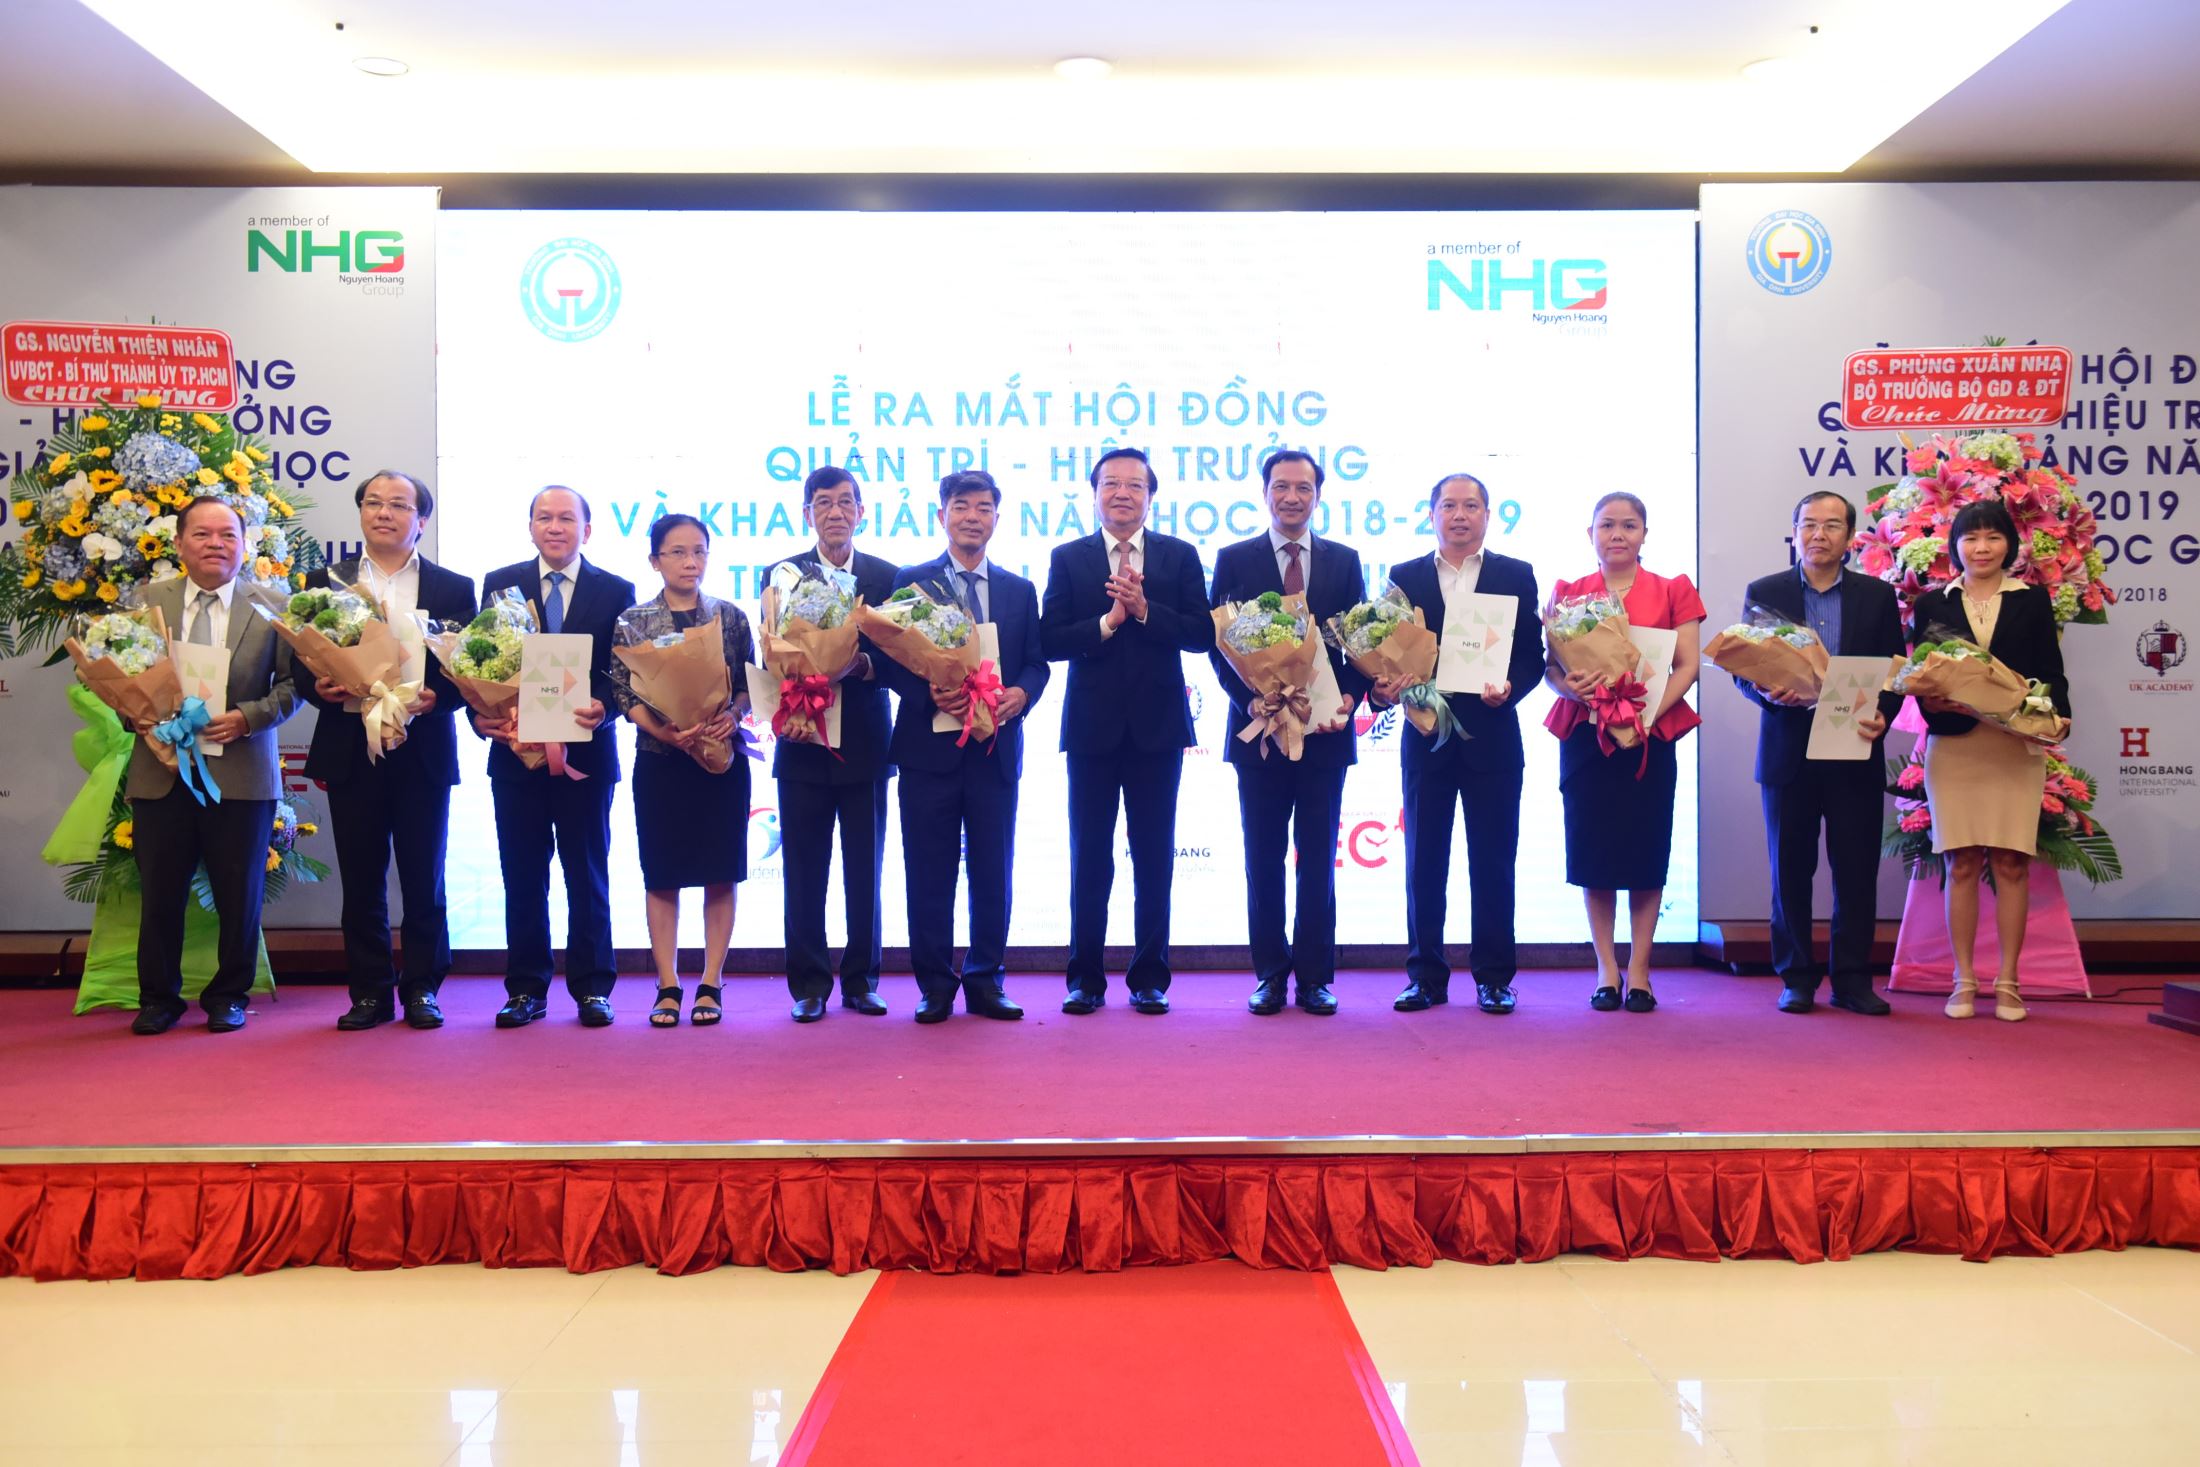 11 members of the board of management of Gia Dinh University received the decision and flowers from Mr. Le Hong Son, director of HCM City Department of Education and Training.